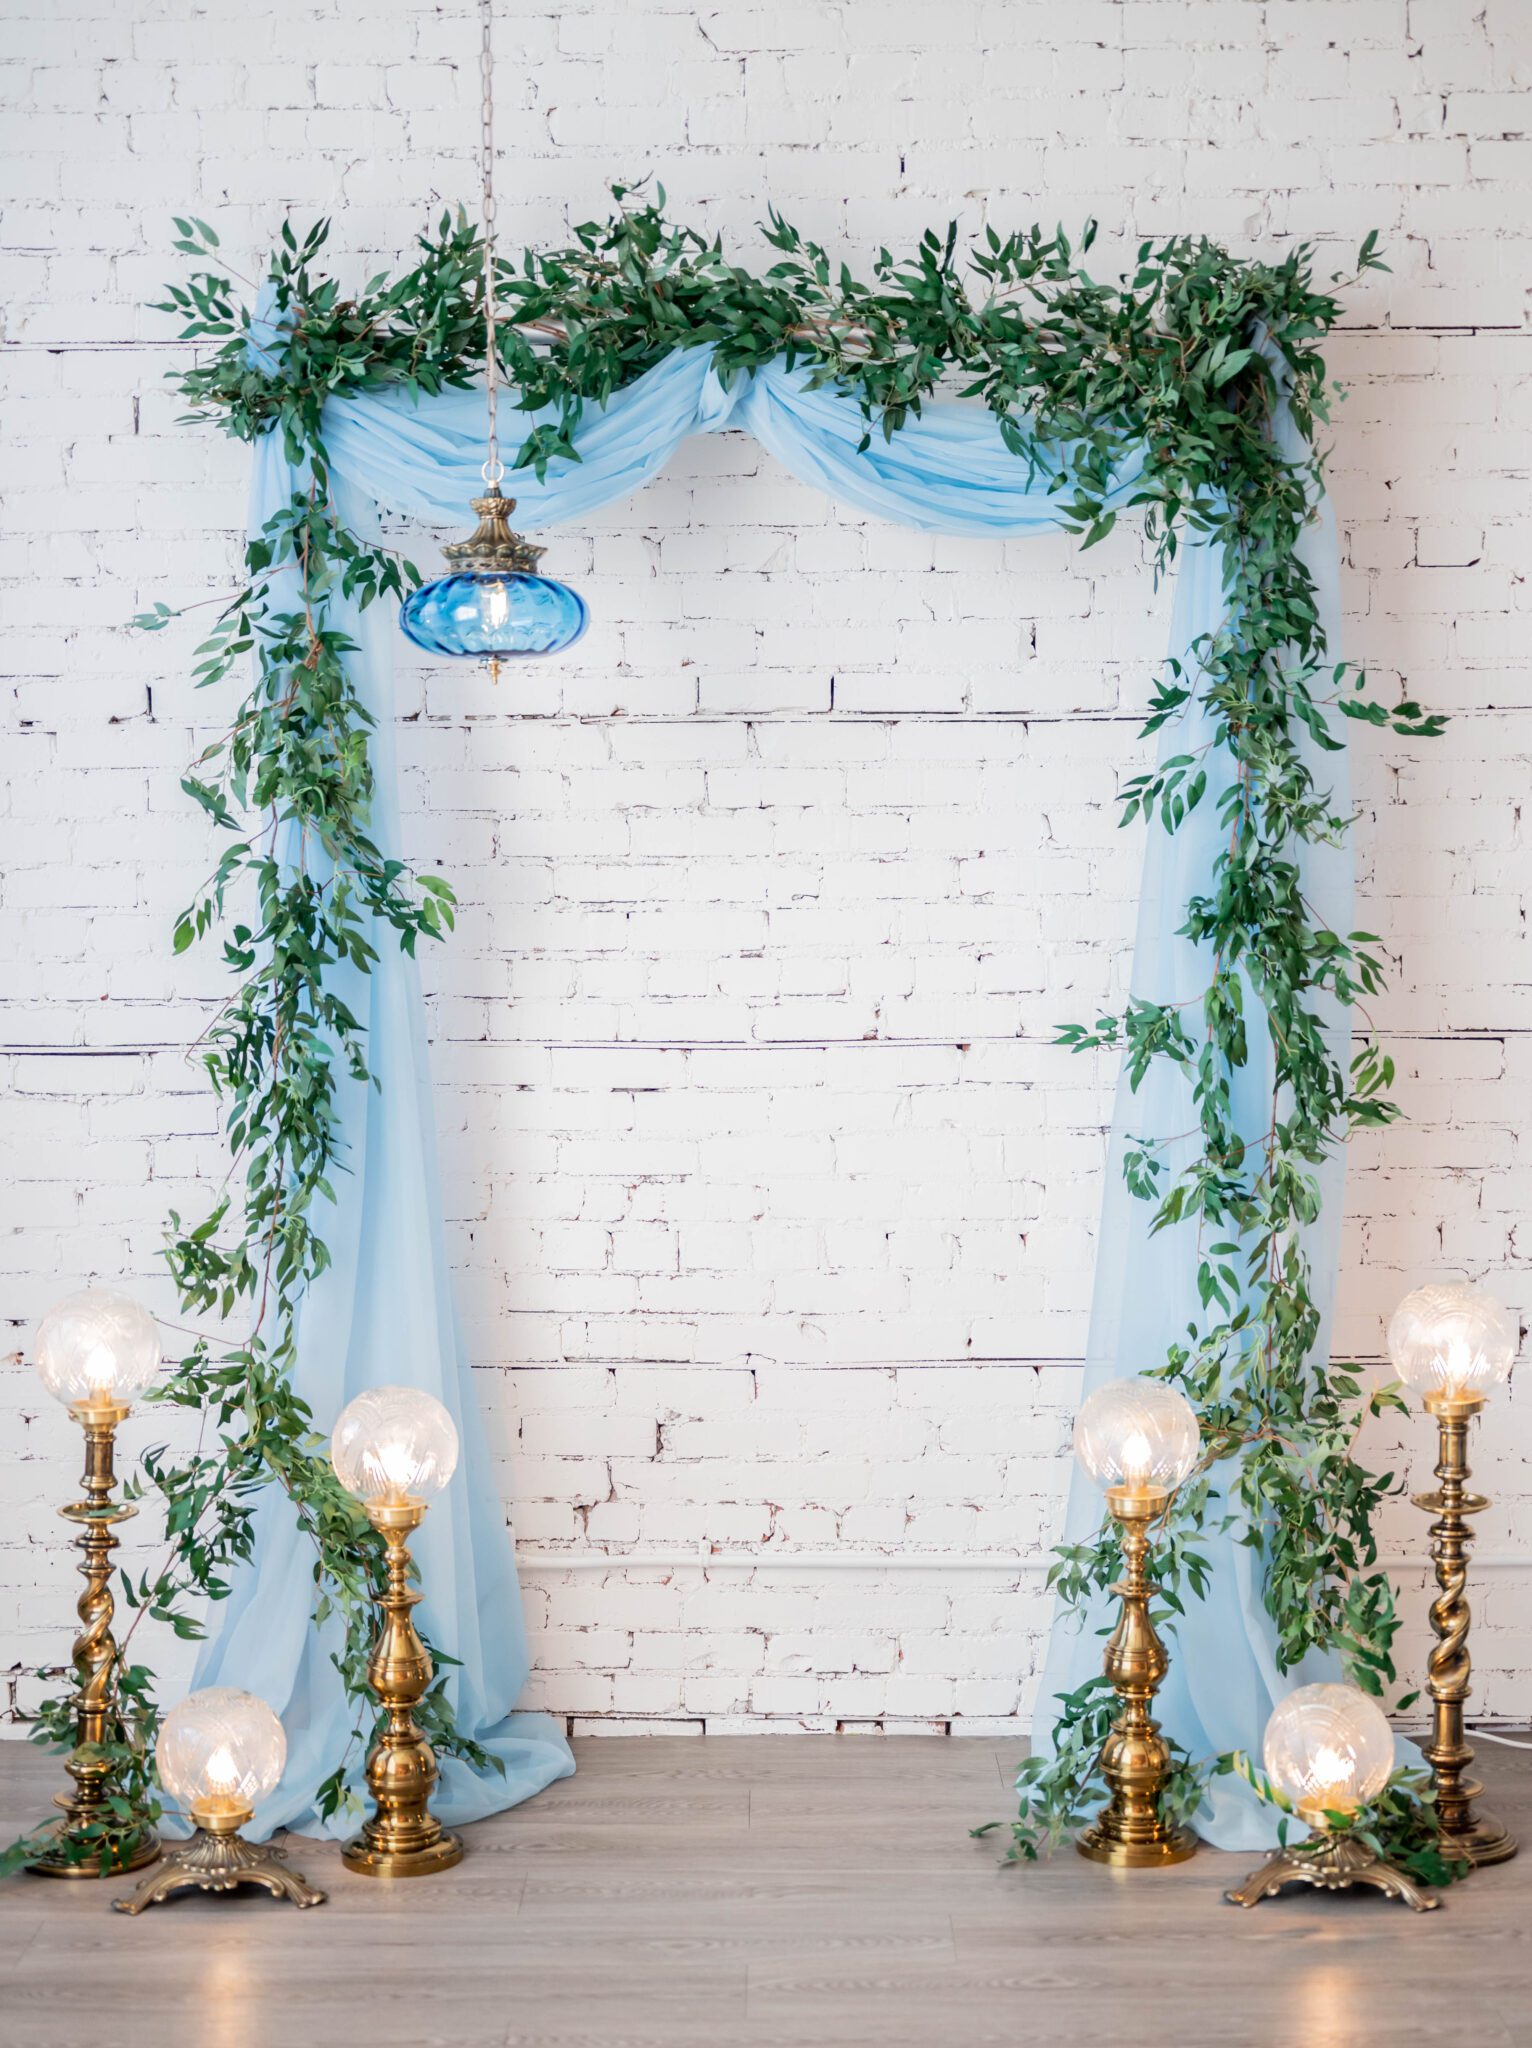 Vintage lighting decor ideas for a romantic ceremony, greenery and baby blue draping on ceremony arch in front of white brick wall, french-inspired with a modern twist wedding inspiration in the heart of Calgary, Alberta